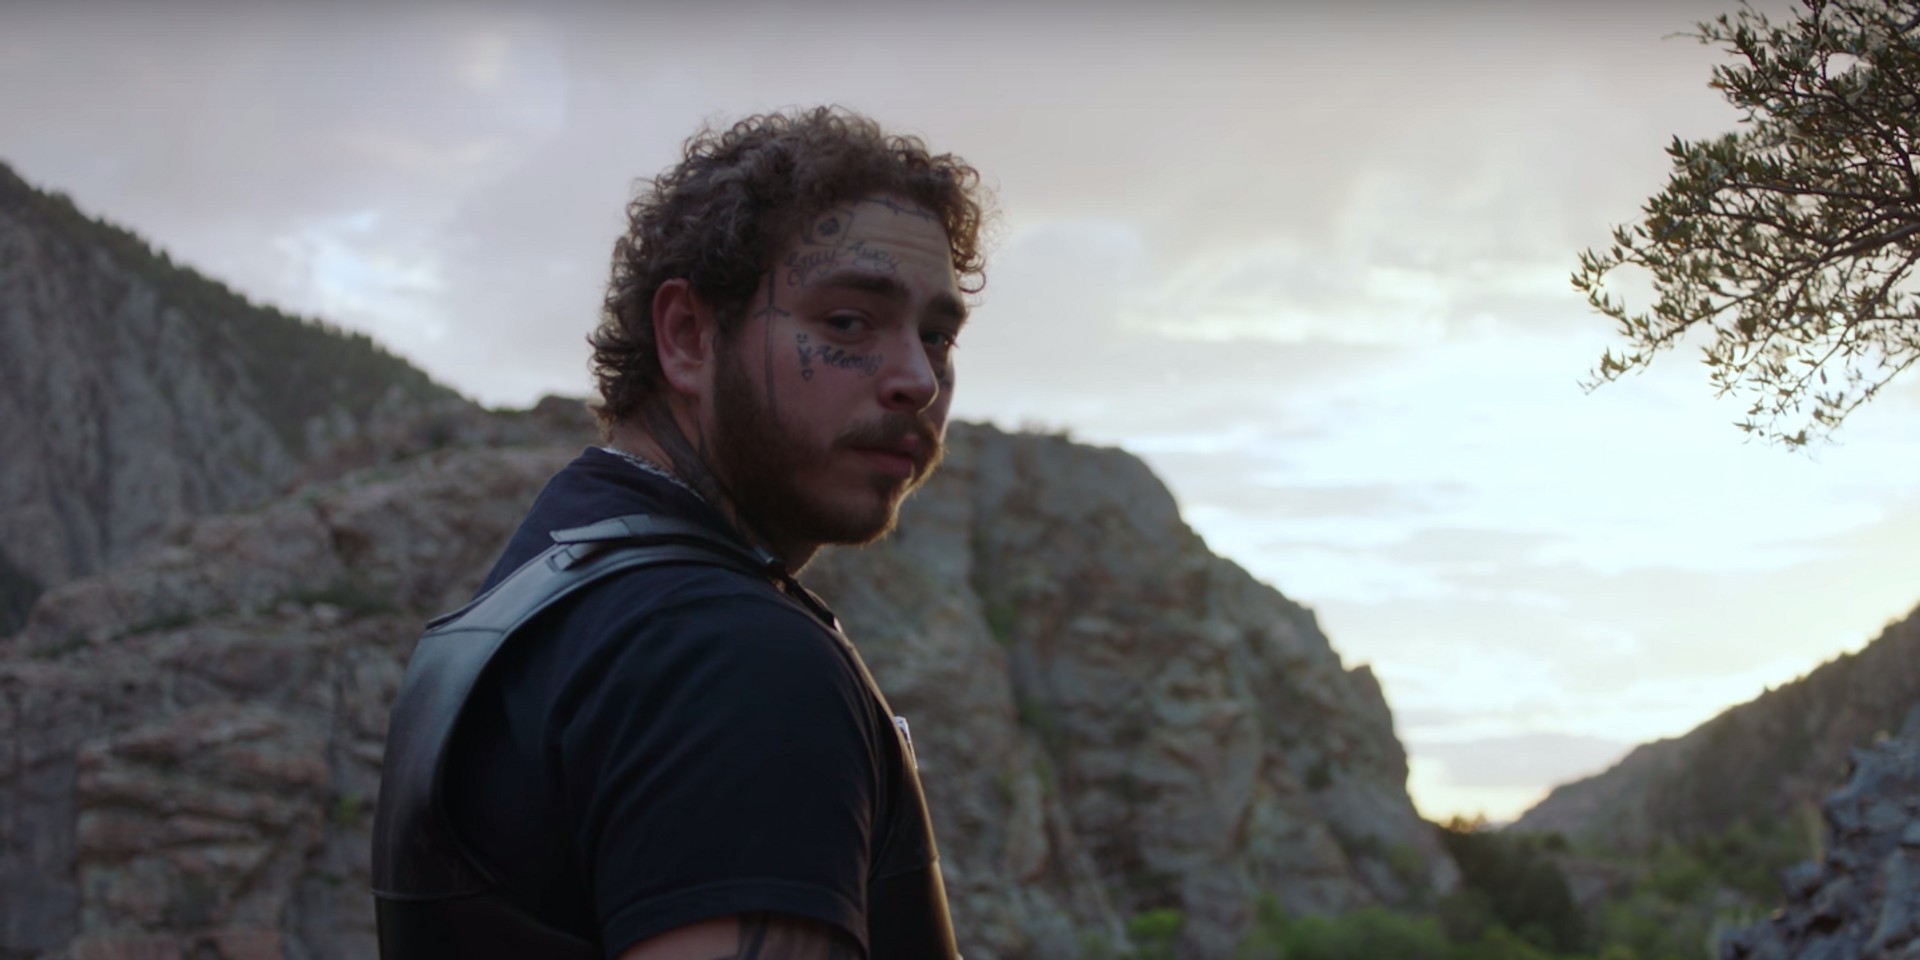 Post Malone shows off his riches in new music video for 'Saint-Tropez'